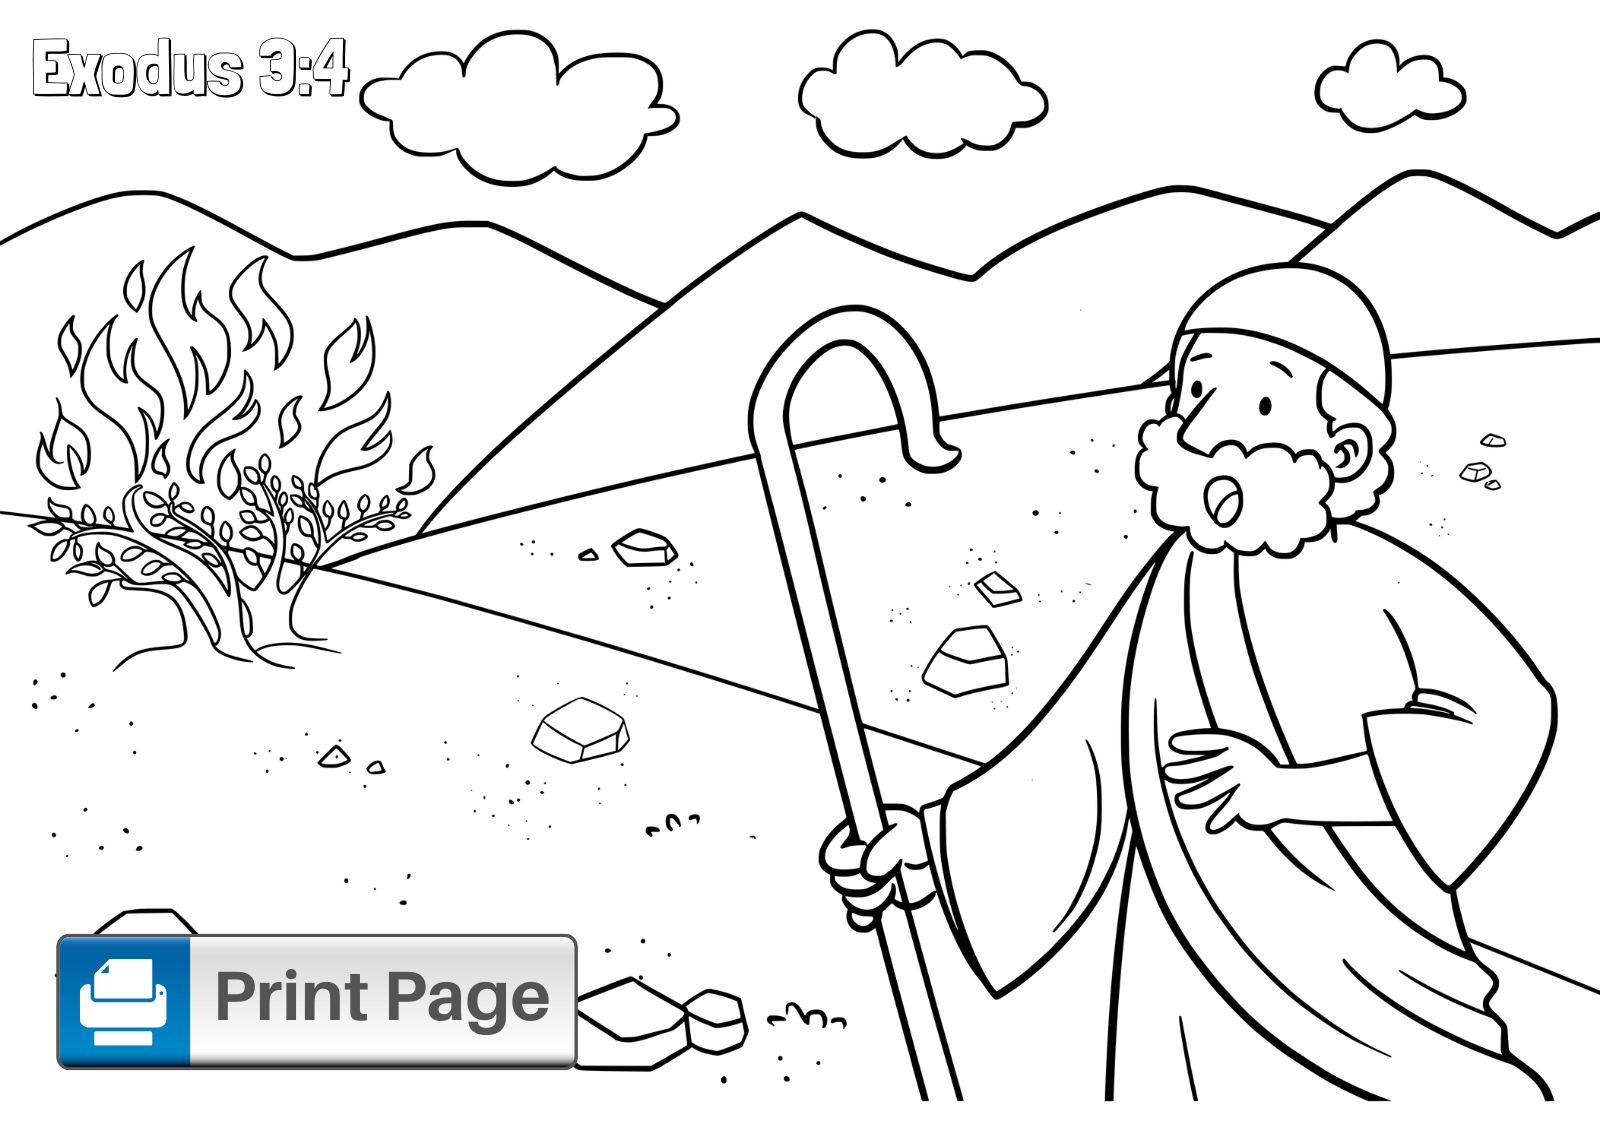 Free Moses and the Burning Bush Coloring Pages – ConnectUS